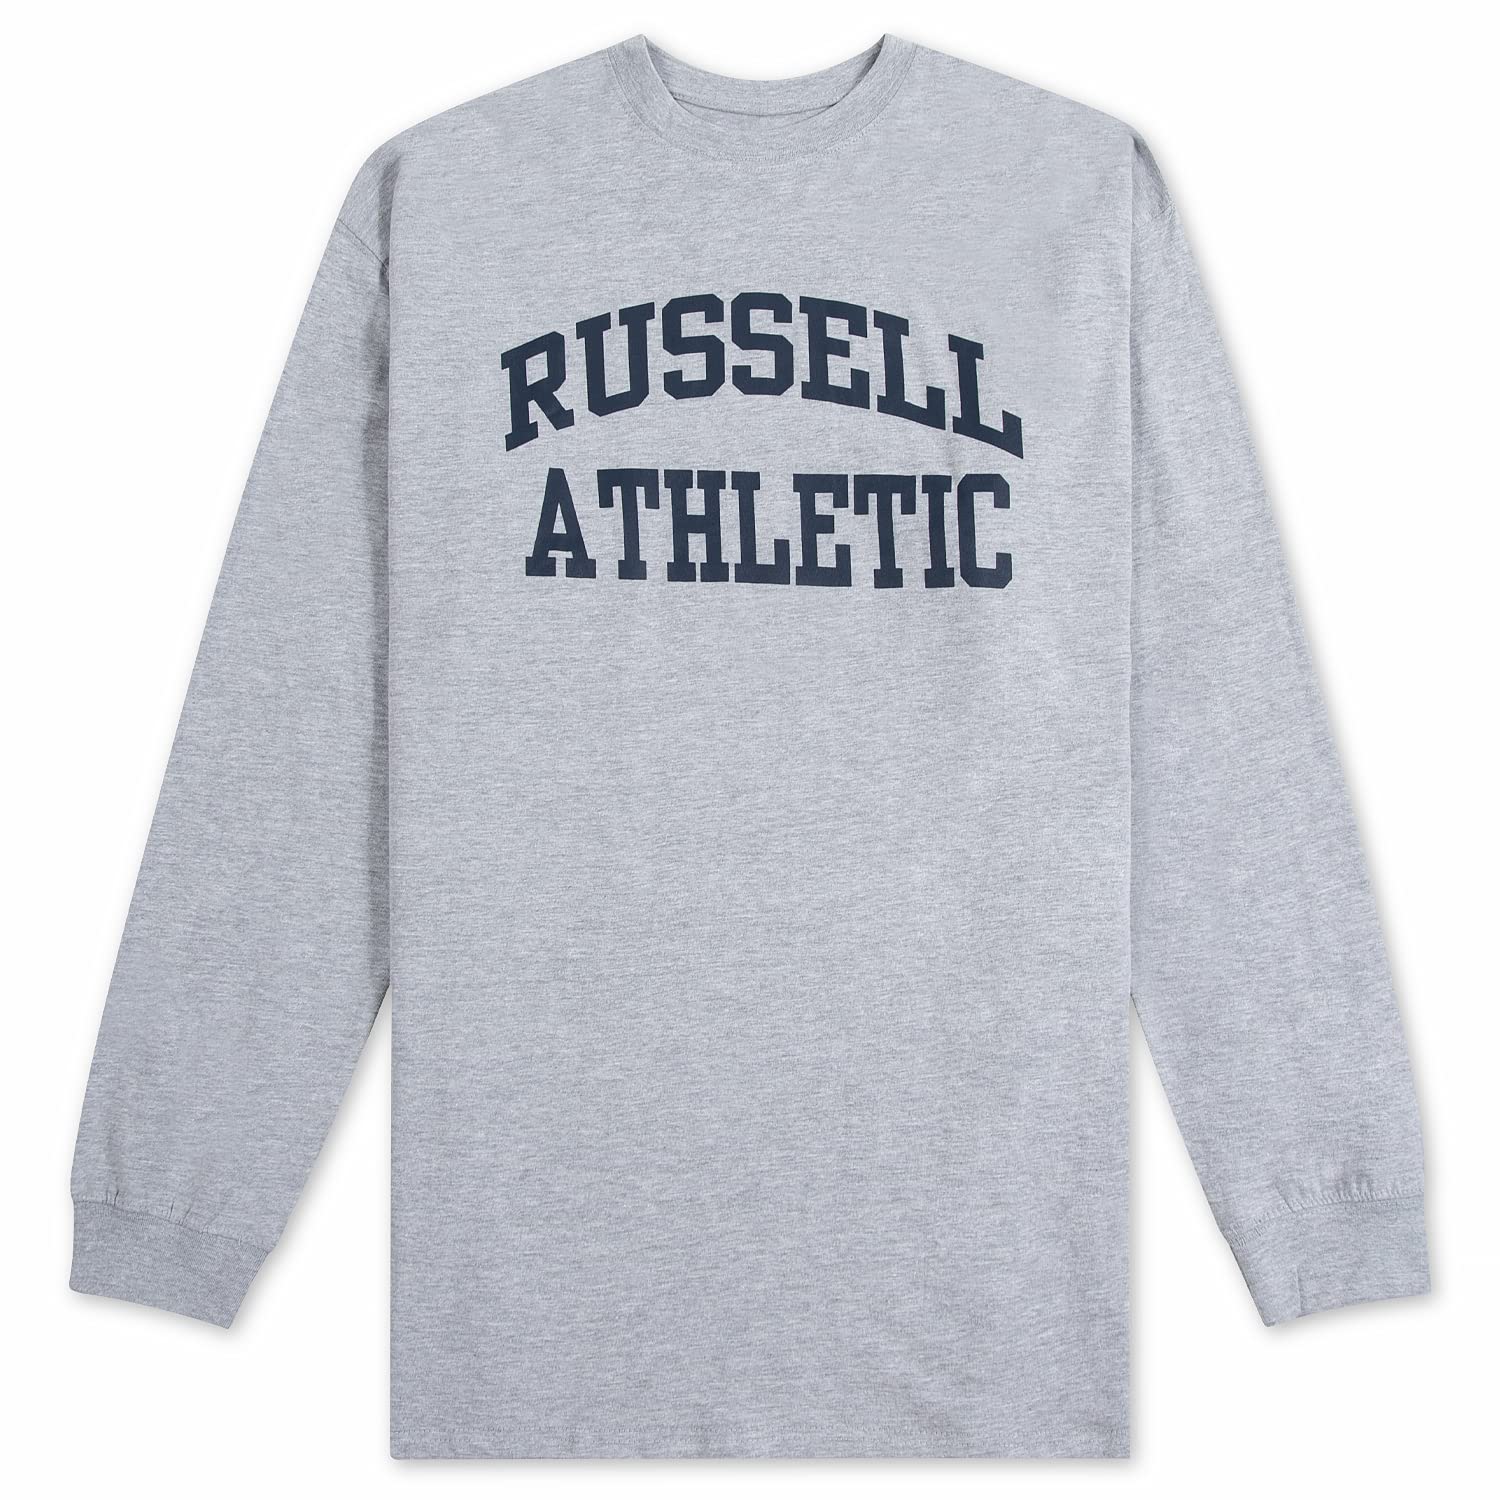 Russell Athletic Men's T-Shirt - Grey - XL